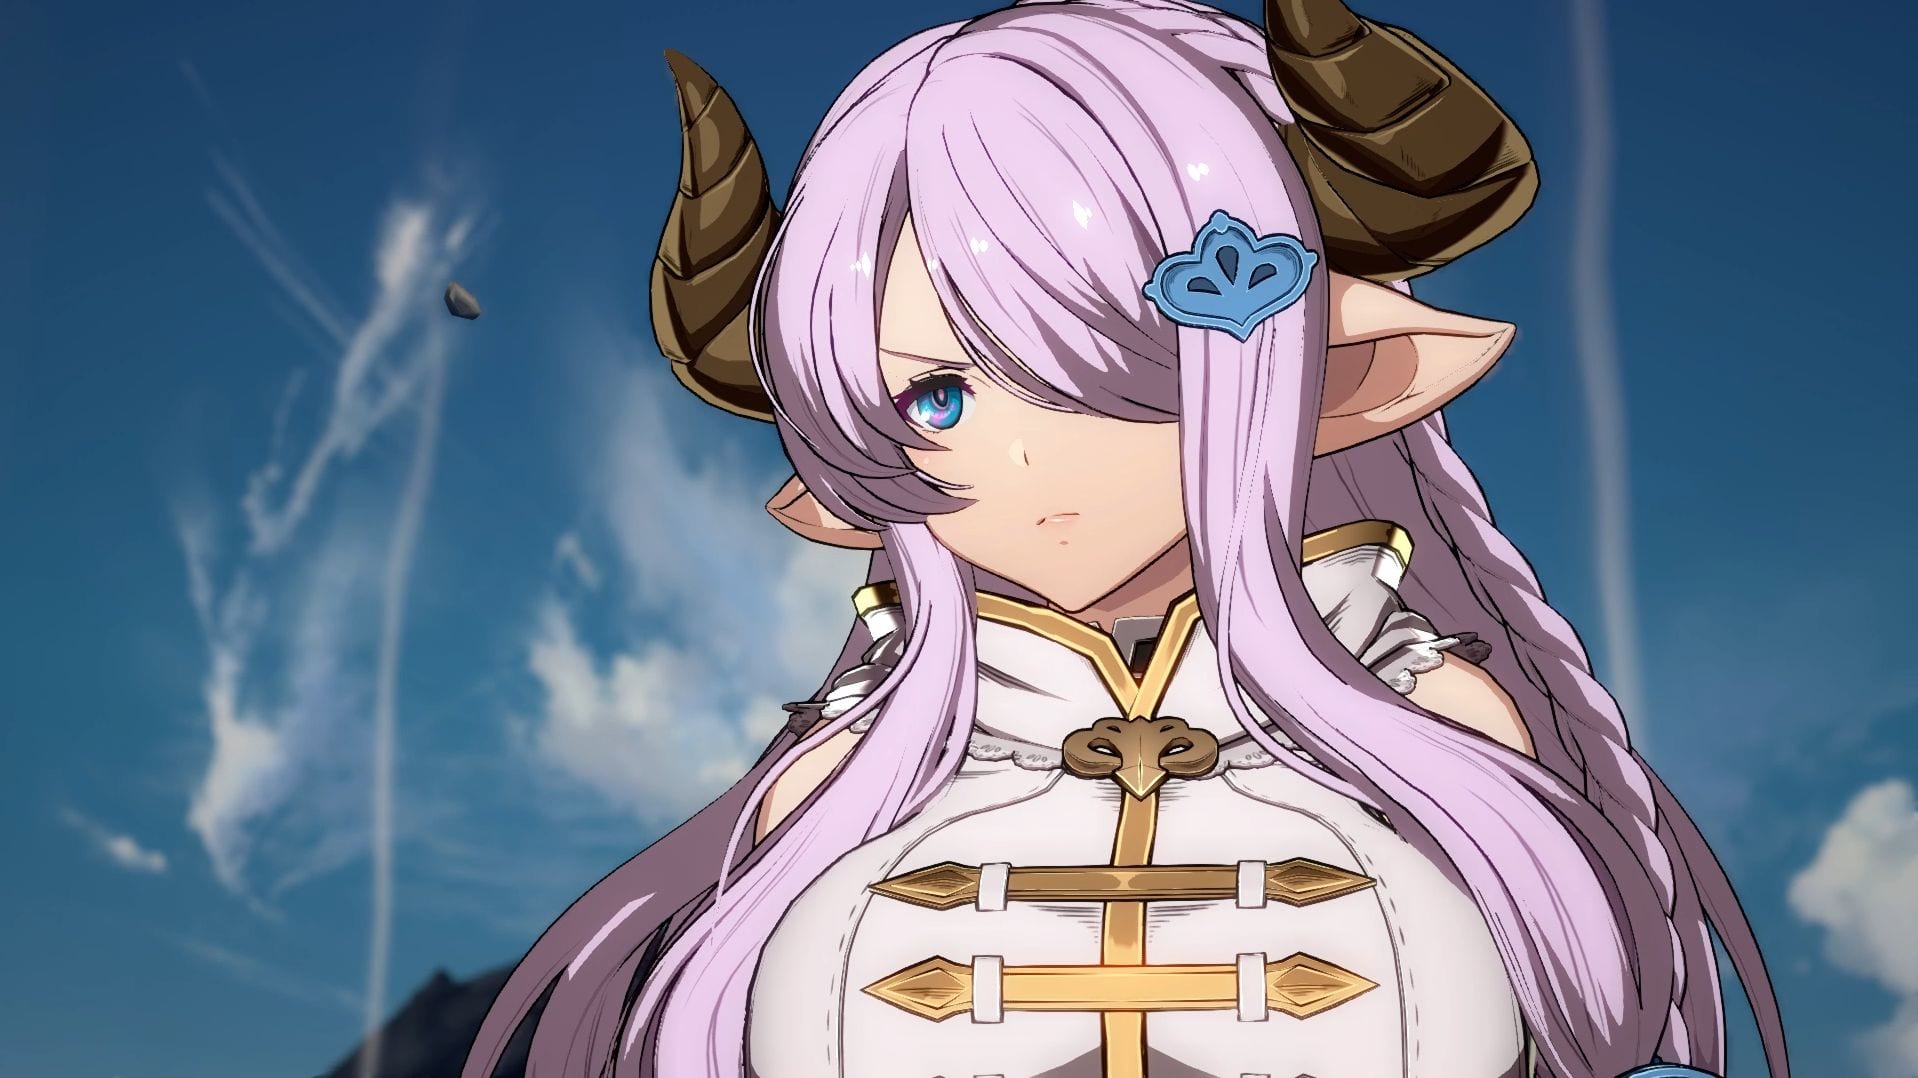 Granblue Fantasy Versus Gets New Screenshots and Details About DLC